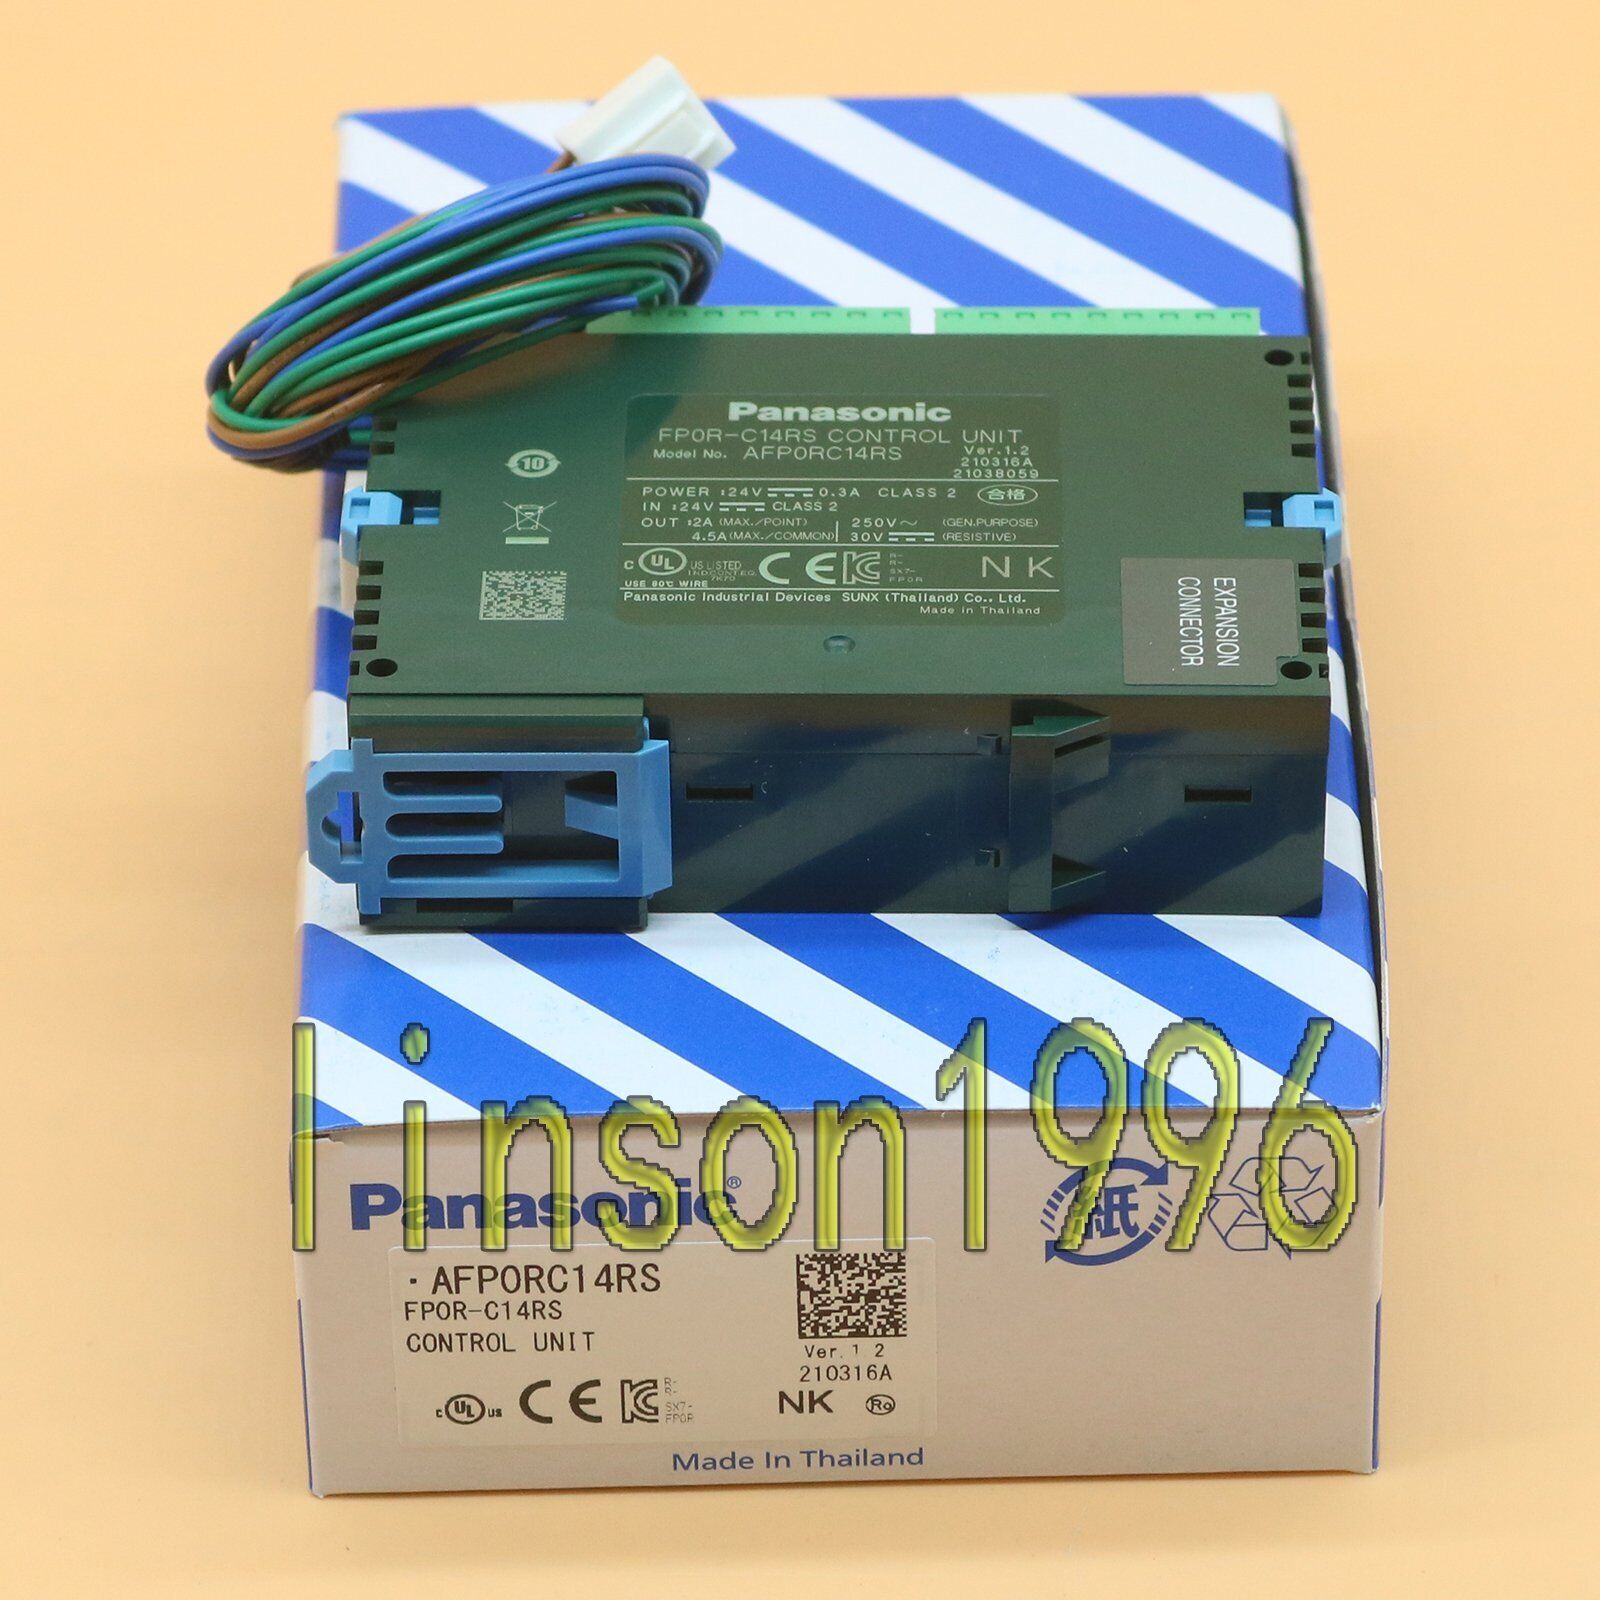 new One  For Panasonic PLC CONTROL UNIT AFP0RC14RS FP0R-C14RS In Box